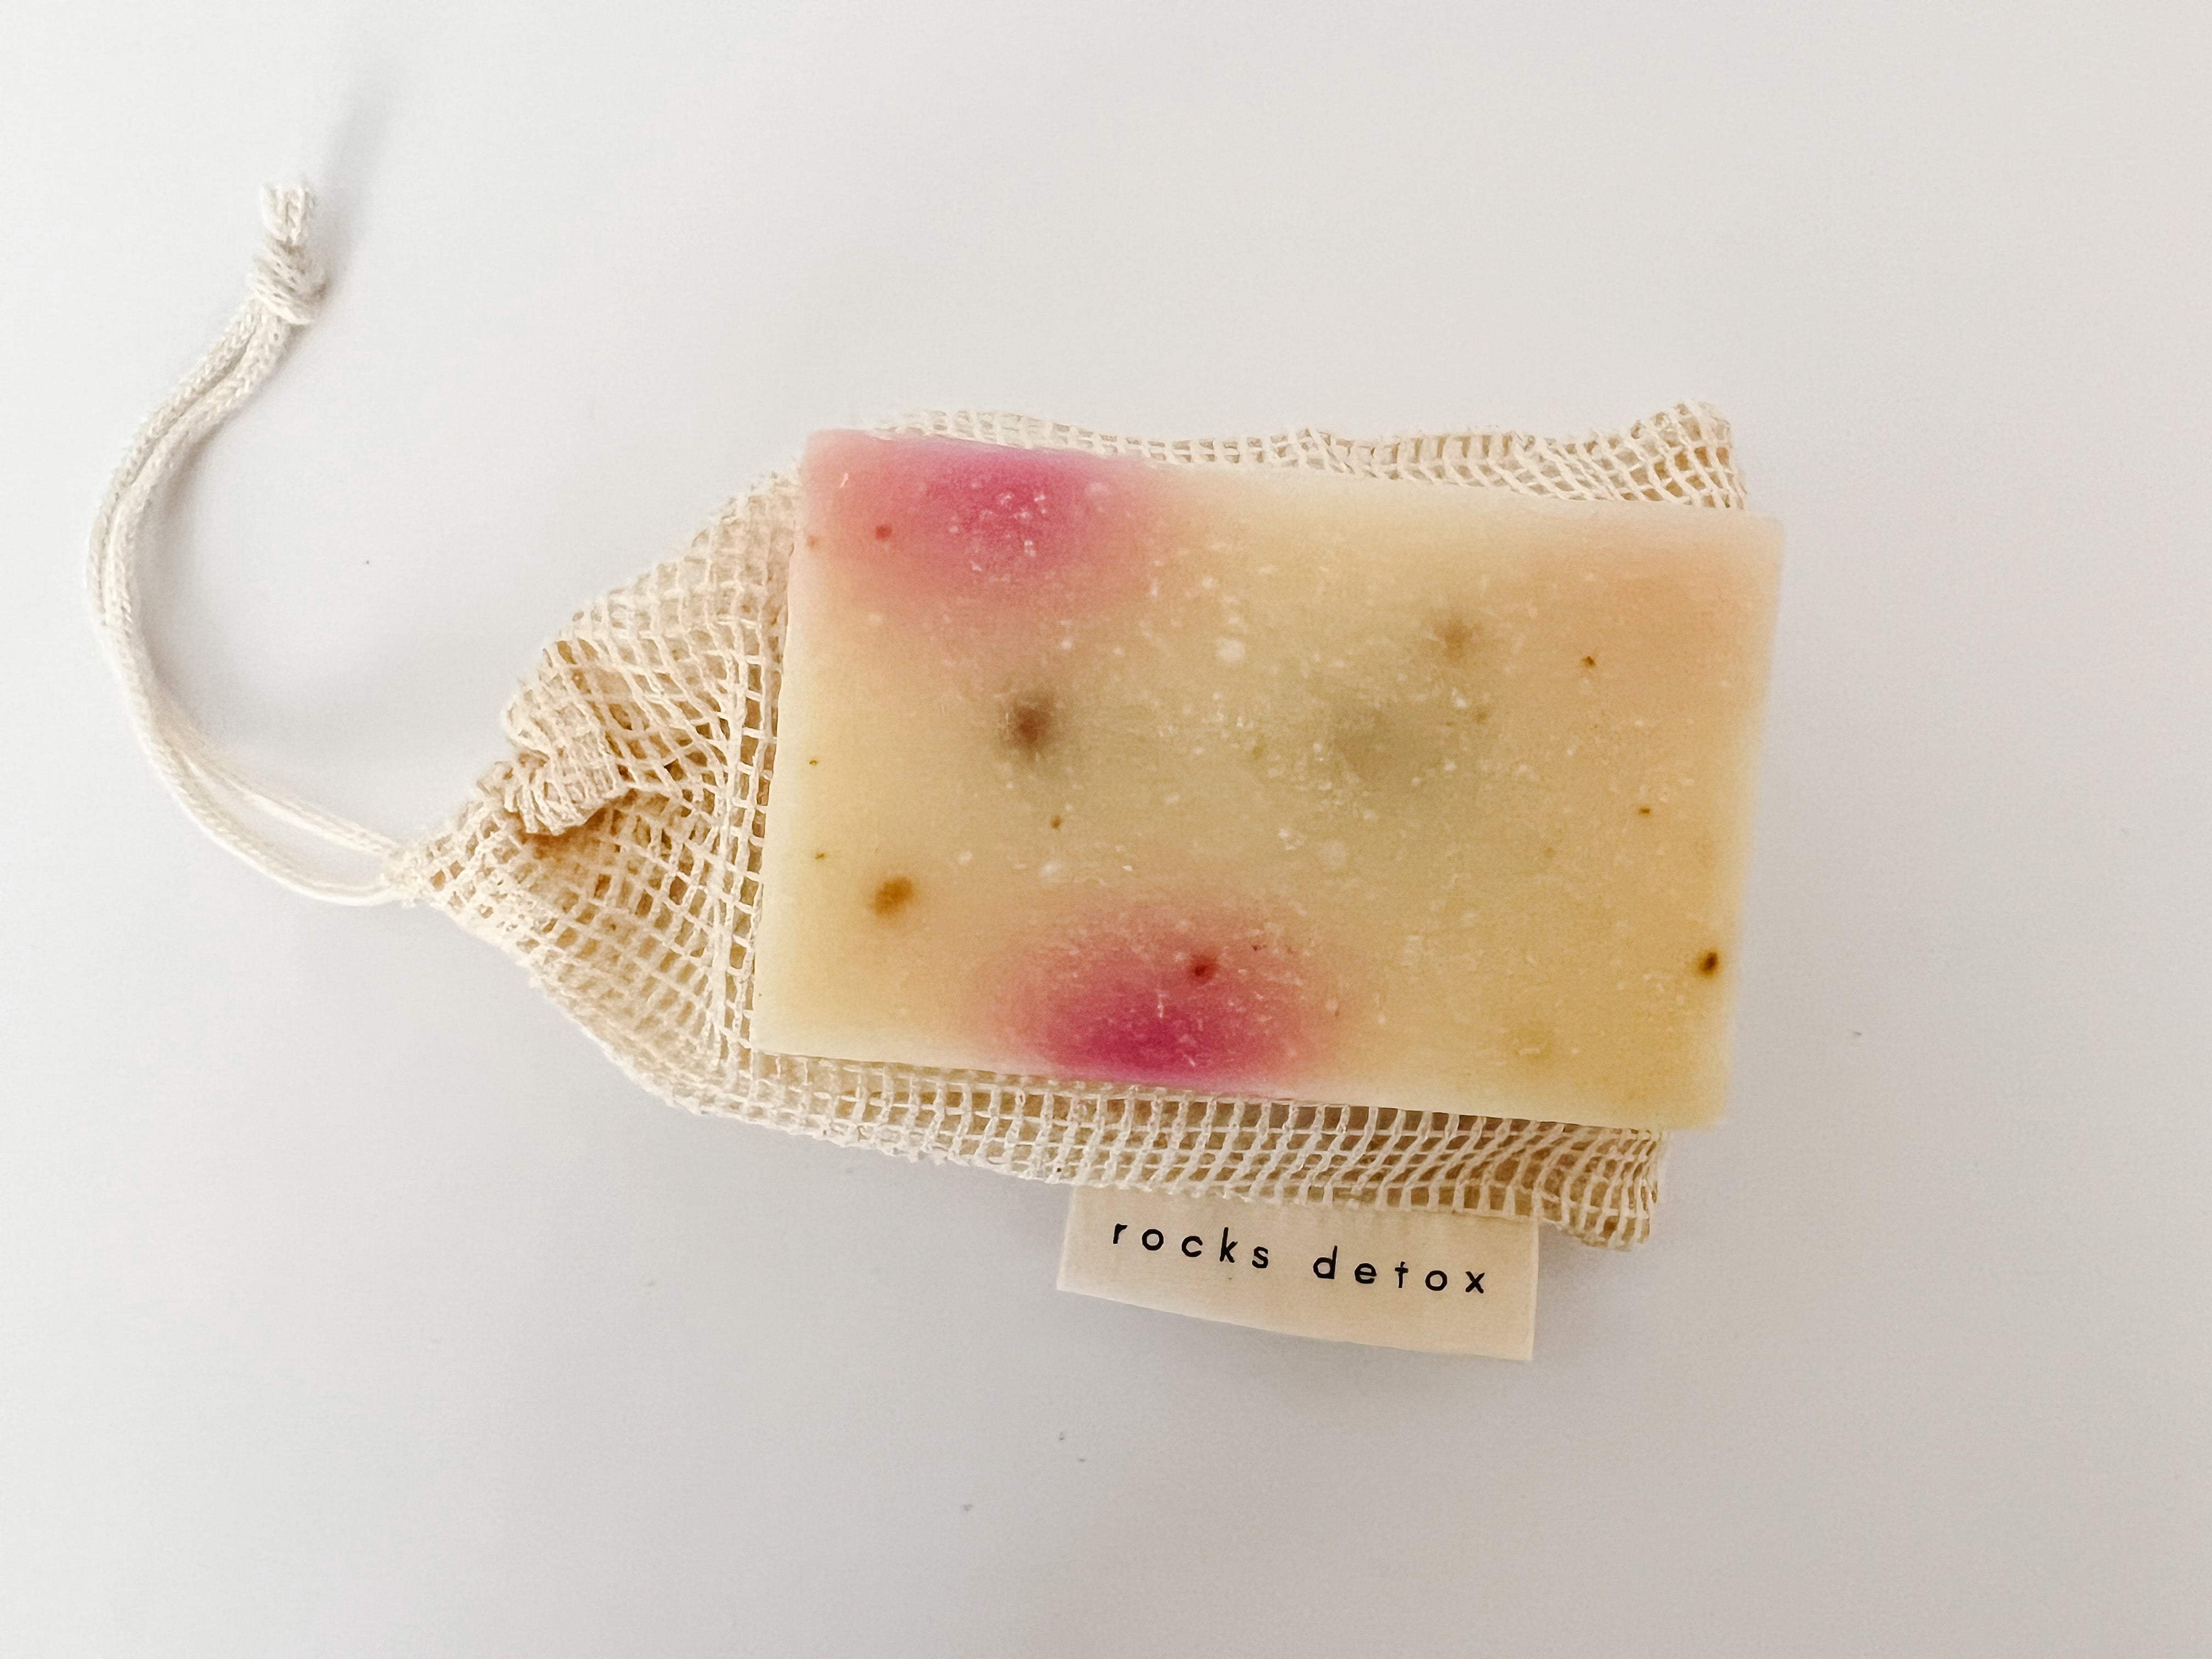 Chia + Passion Fruit All Natural Handmade Soap